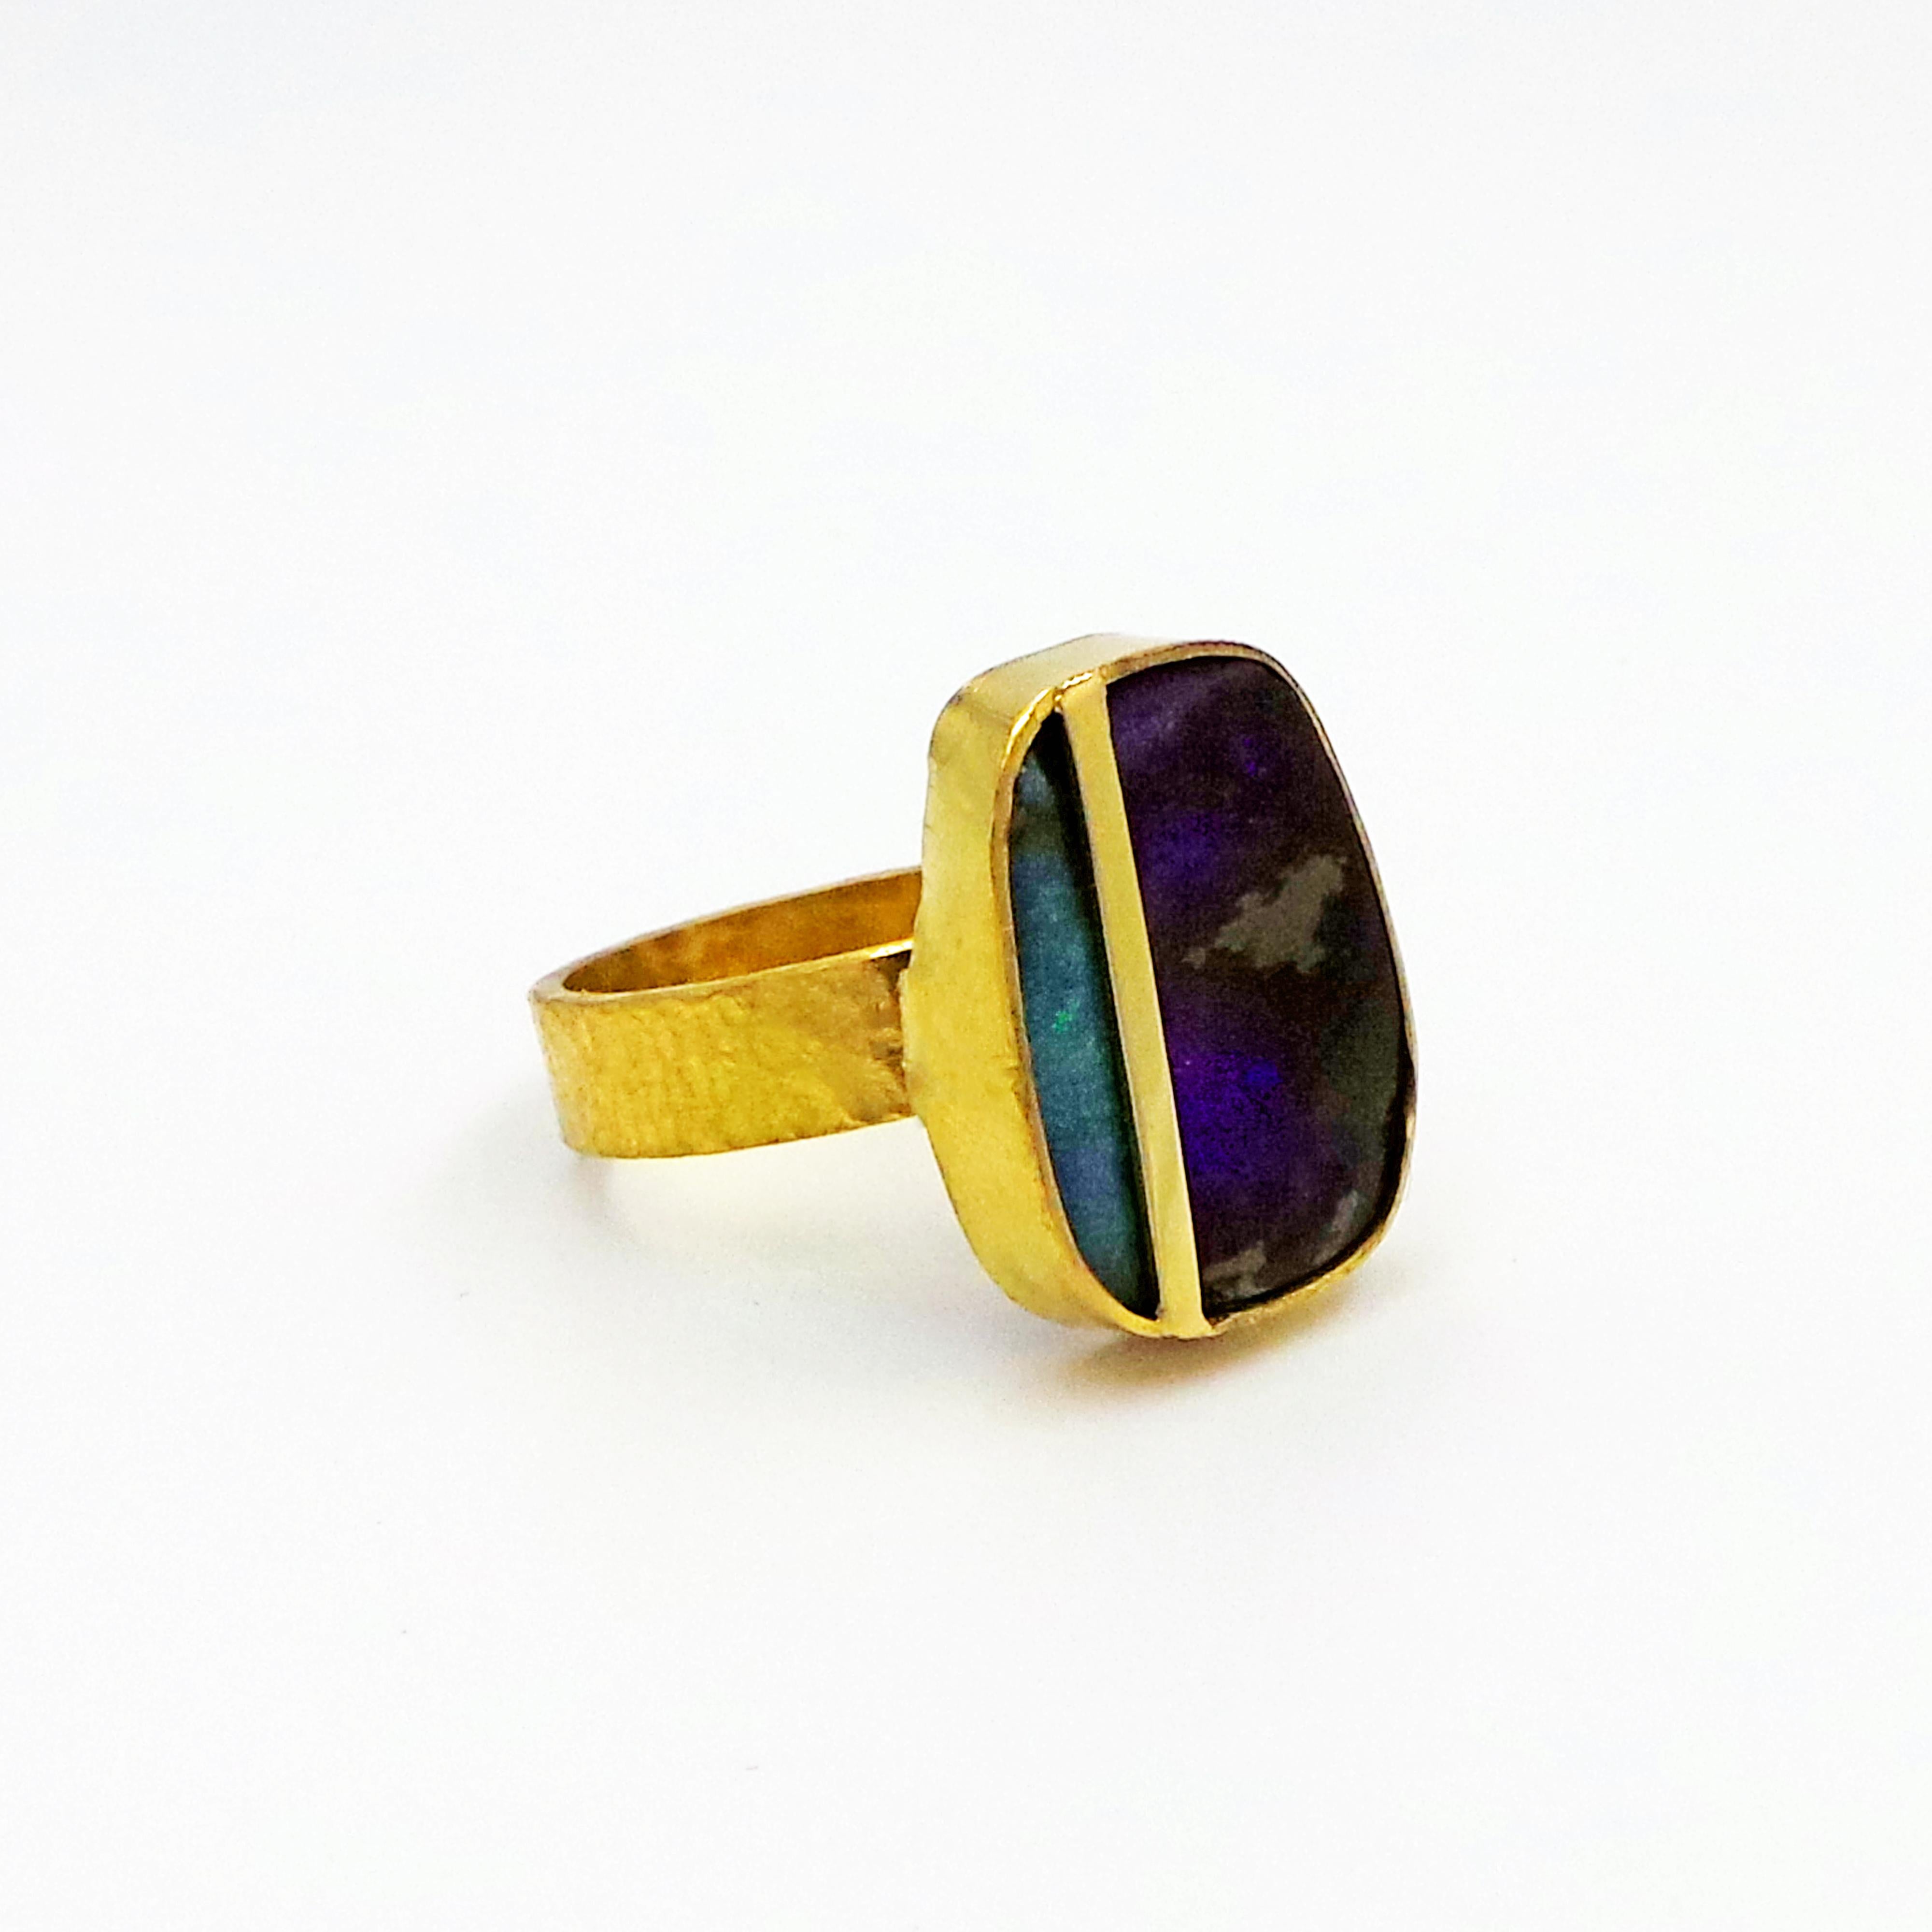 Hand- forged, solid 22k gold ring finished with a hammered, rustic texture. This beautiful Australian Boulder Opal has a natural separation of its green & blue coloration, which is accentuated with a gold bar set across the stone. Size 7. Minimalist